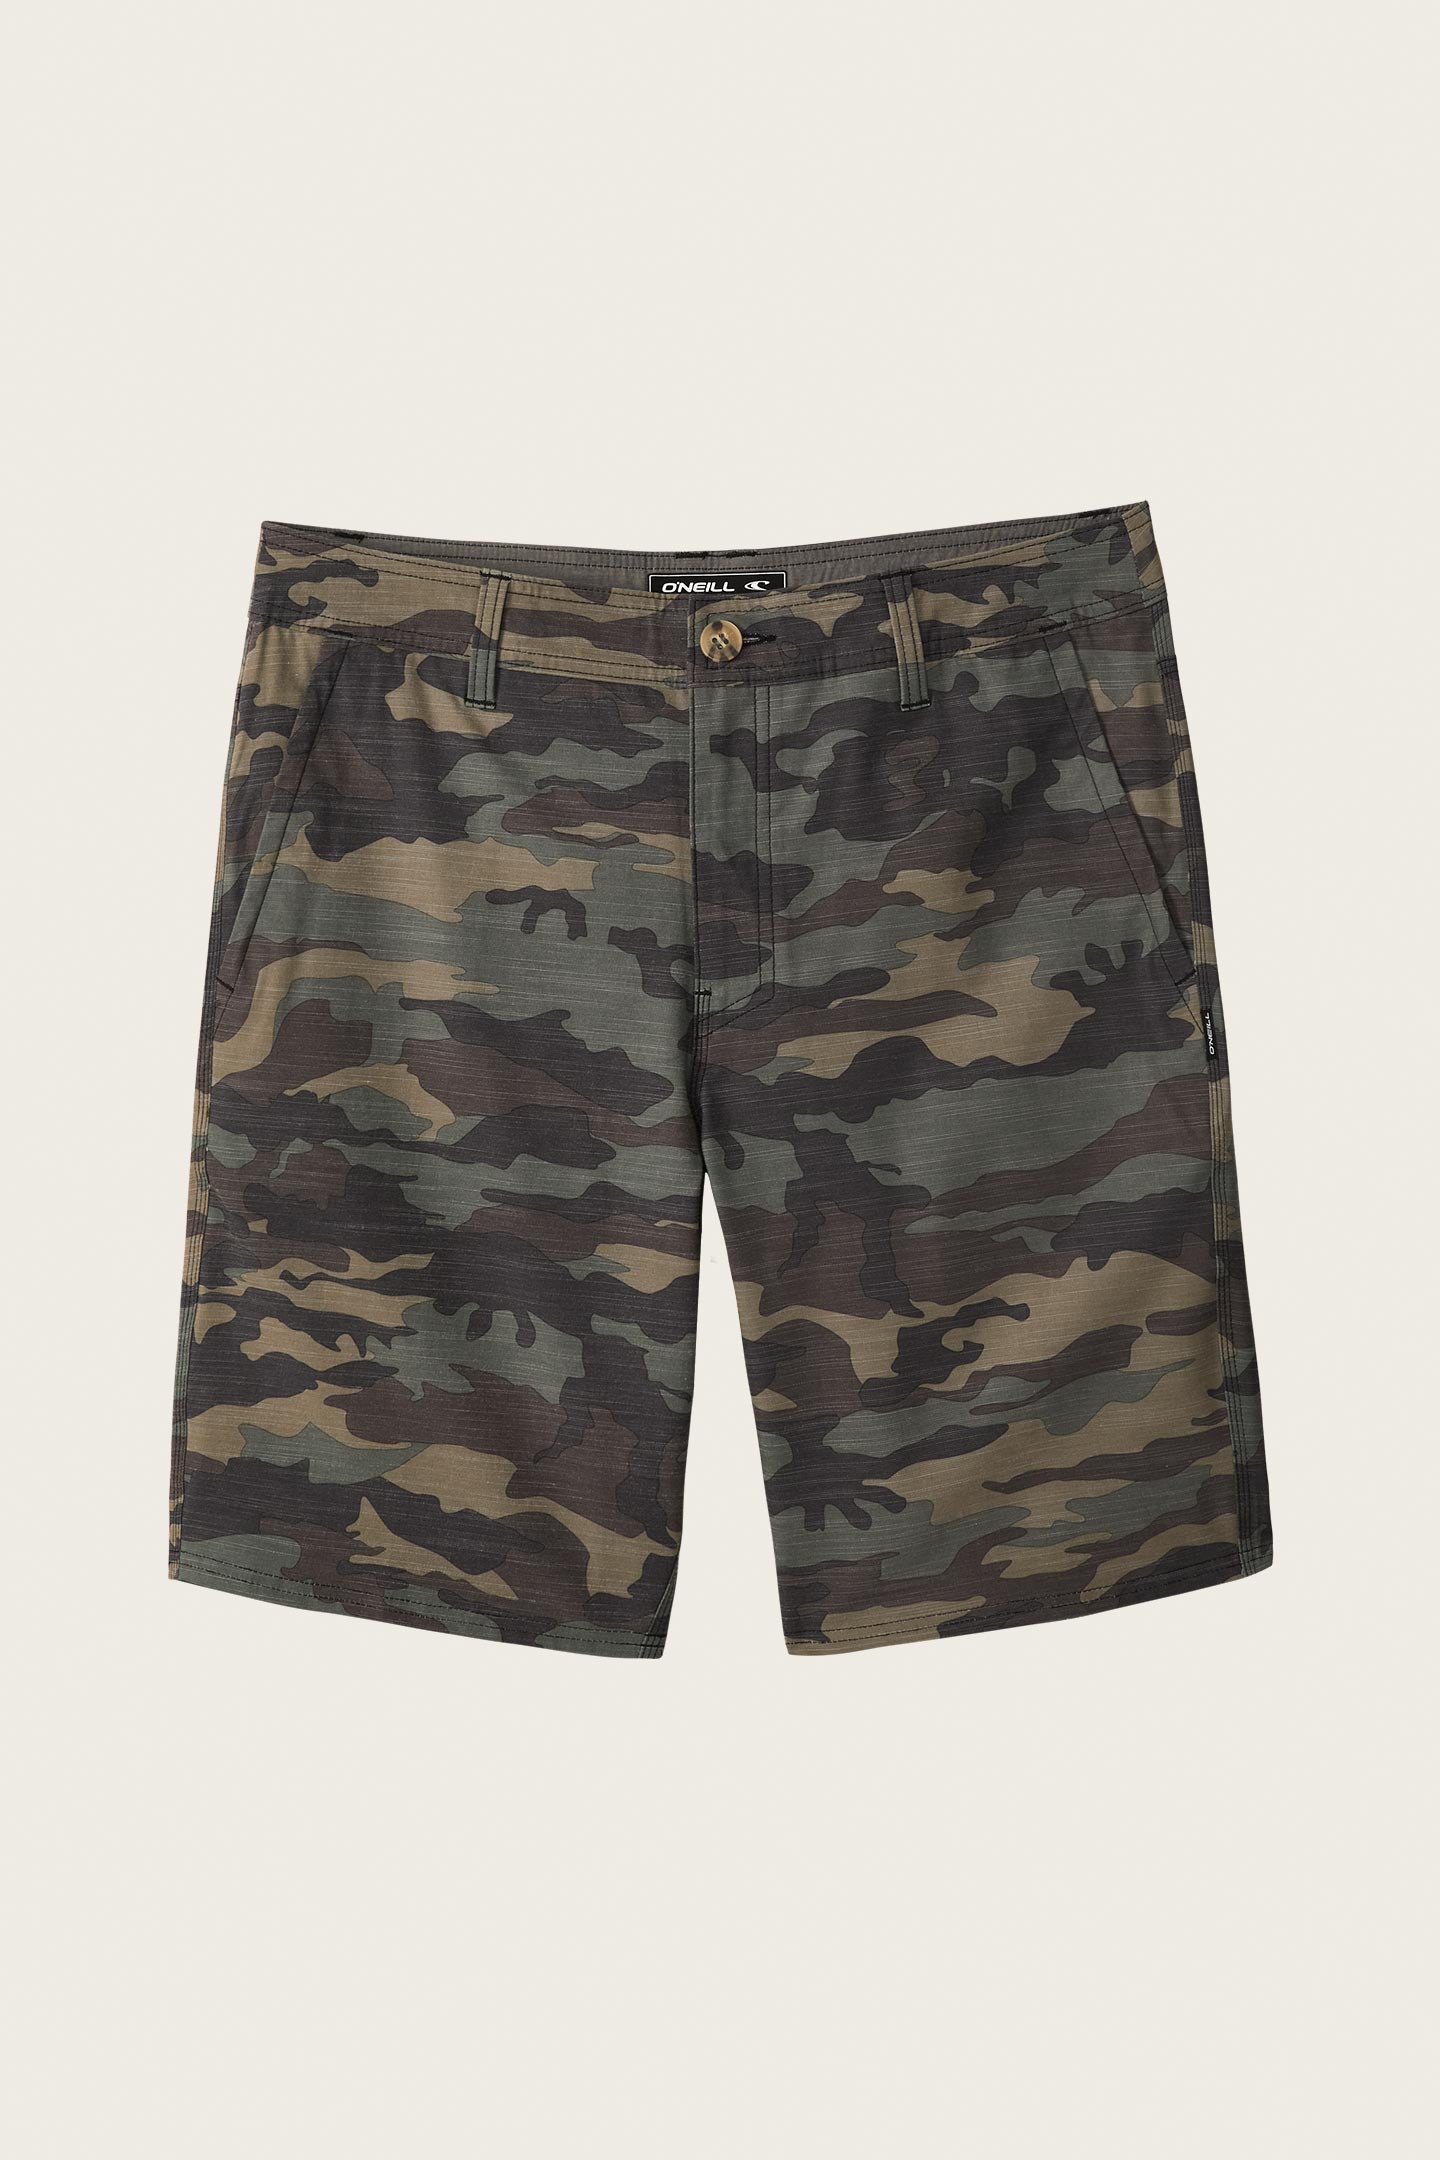 O'Neill Flat Front Cargo Shorts for Men